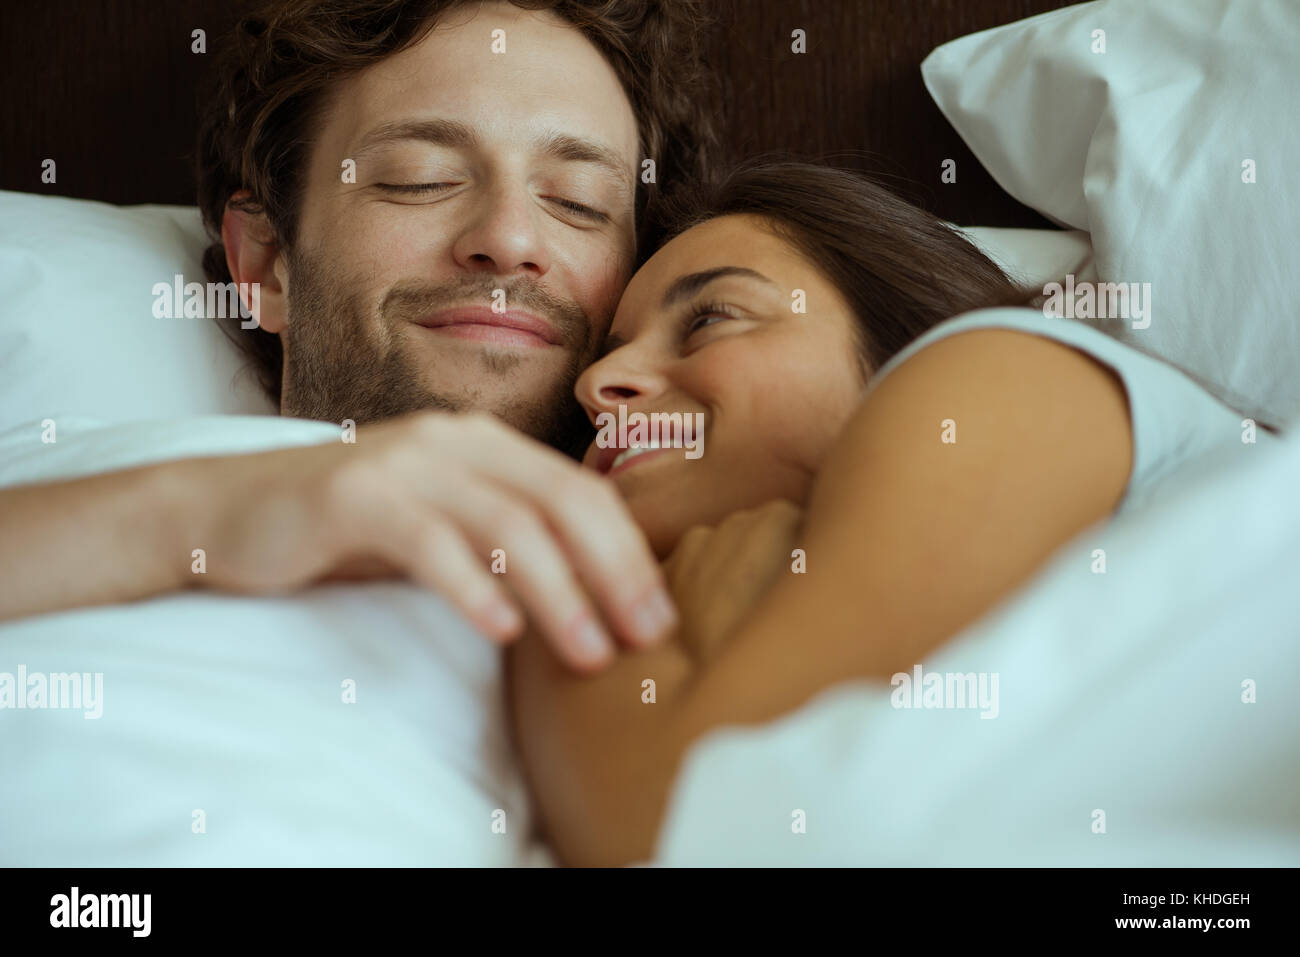 Couple embracing in bed Stock Photo